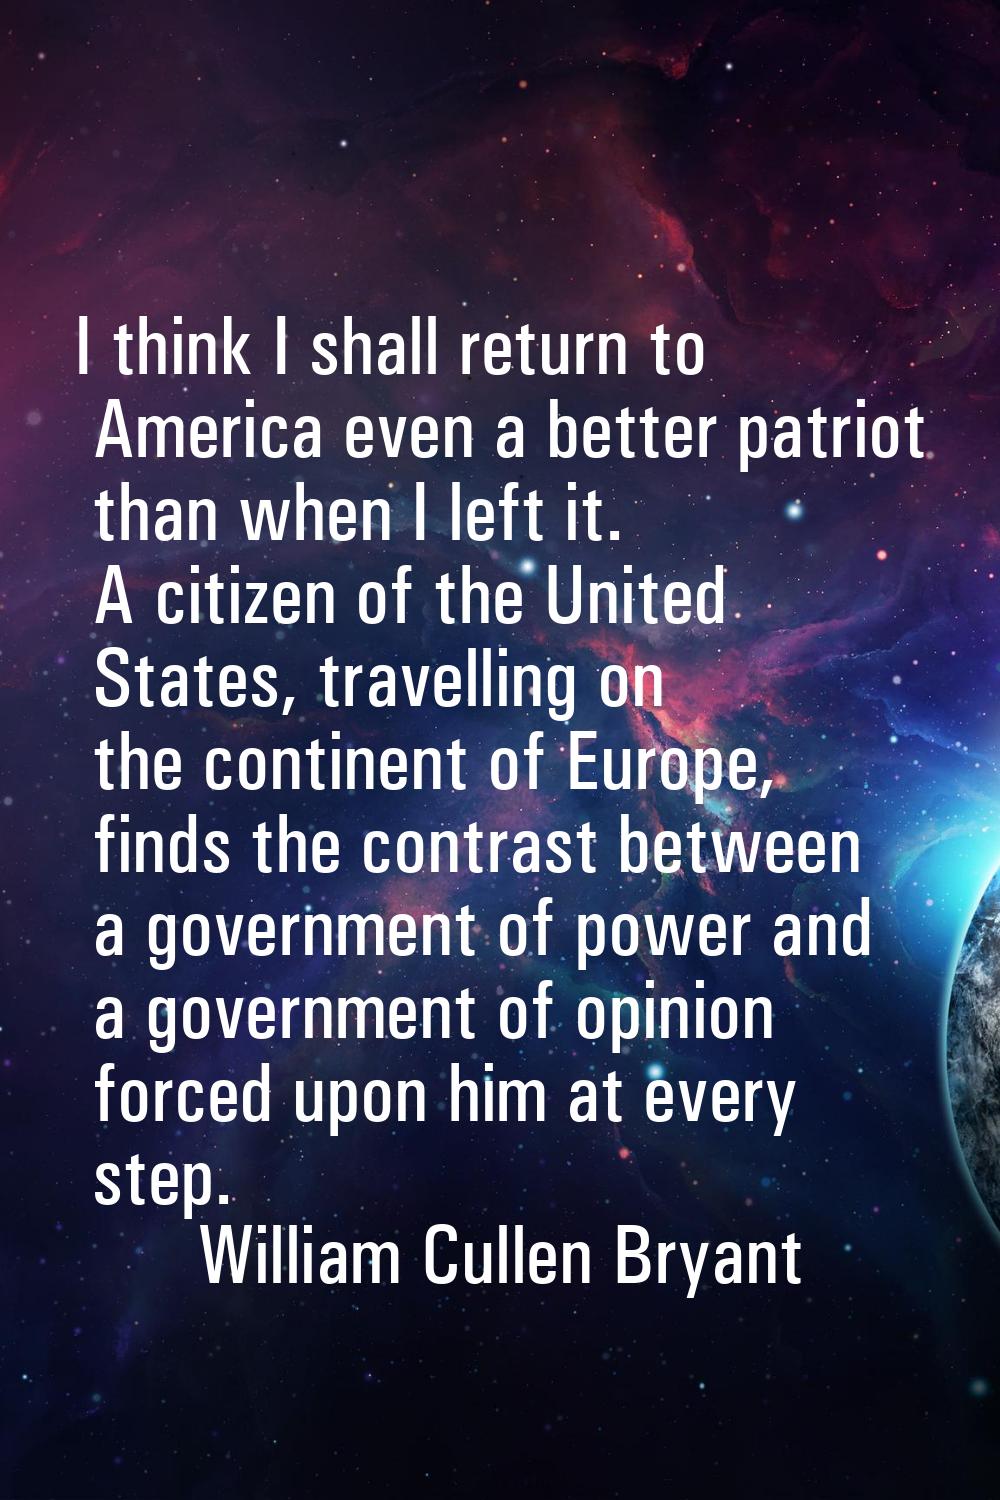 I think I shall return to America even a better patriot than when I left it. A citizen of the Unite